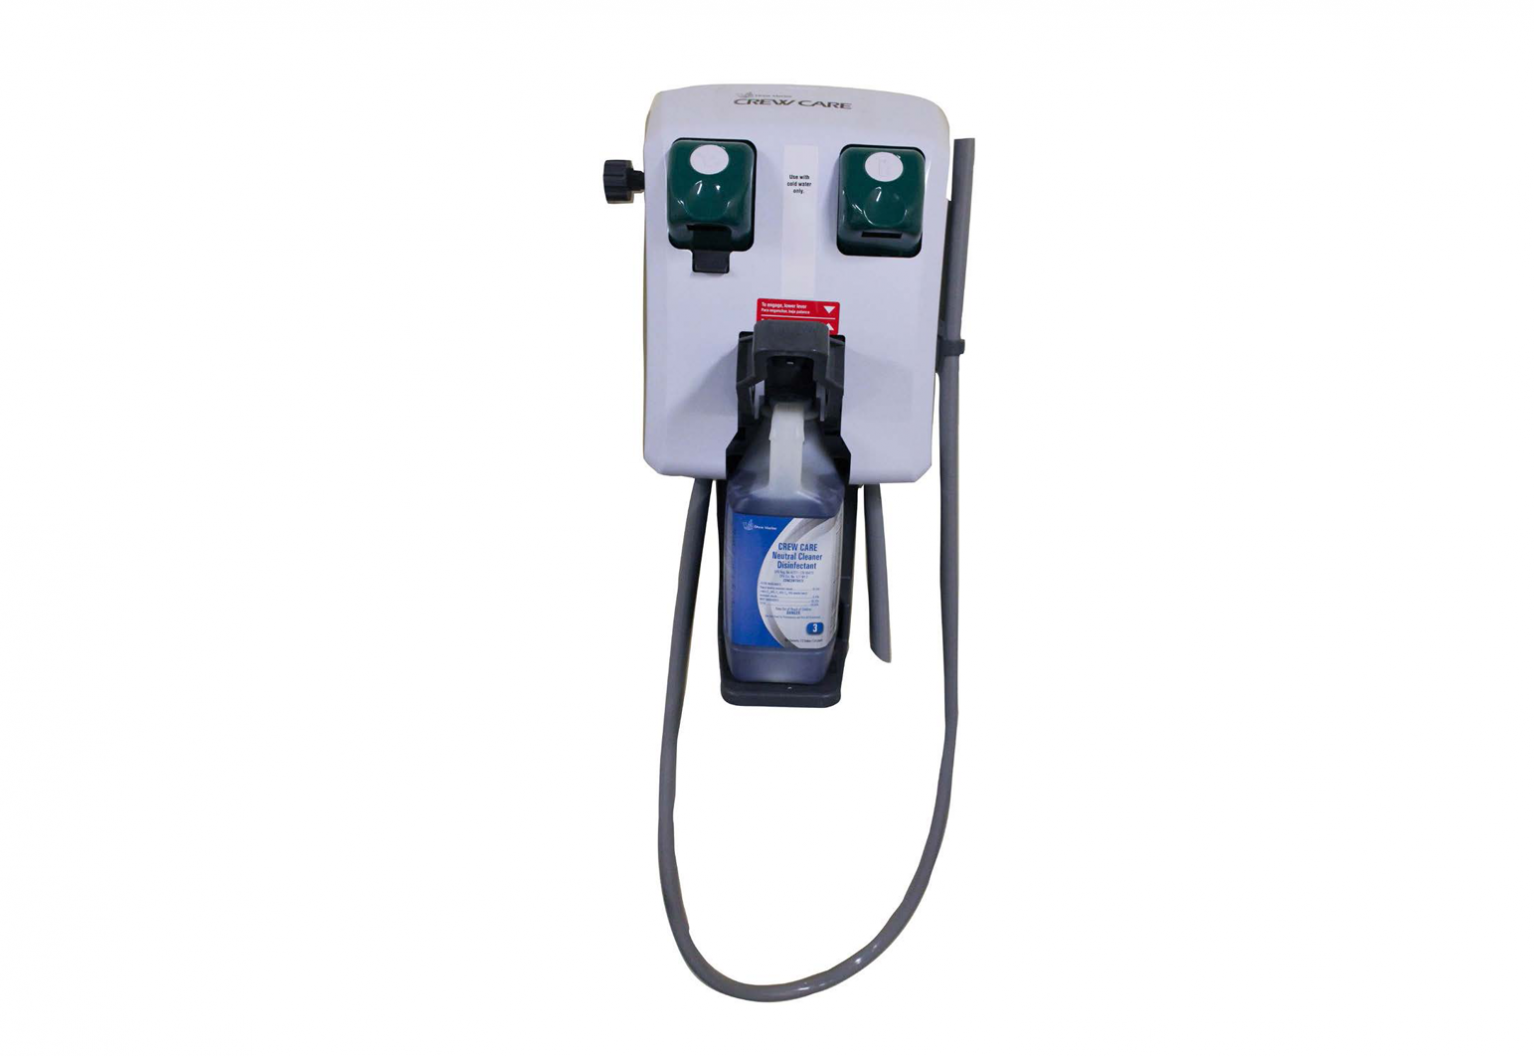 Crew Care Dispenser HD from Drew Marine provides safe, accurate, and economical chemical management.